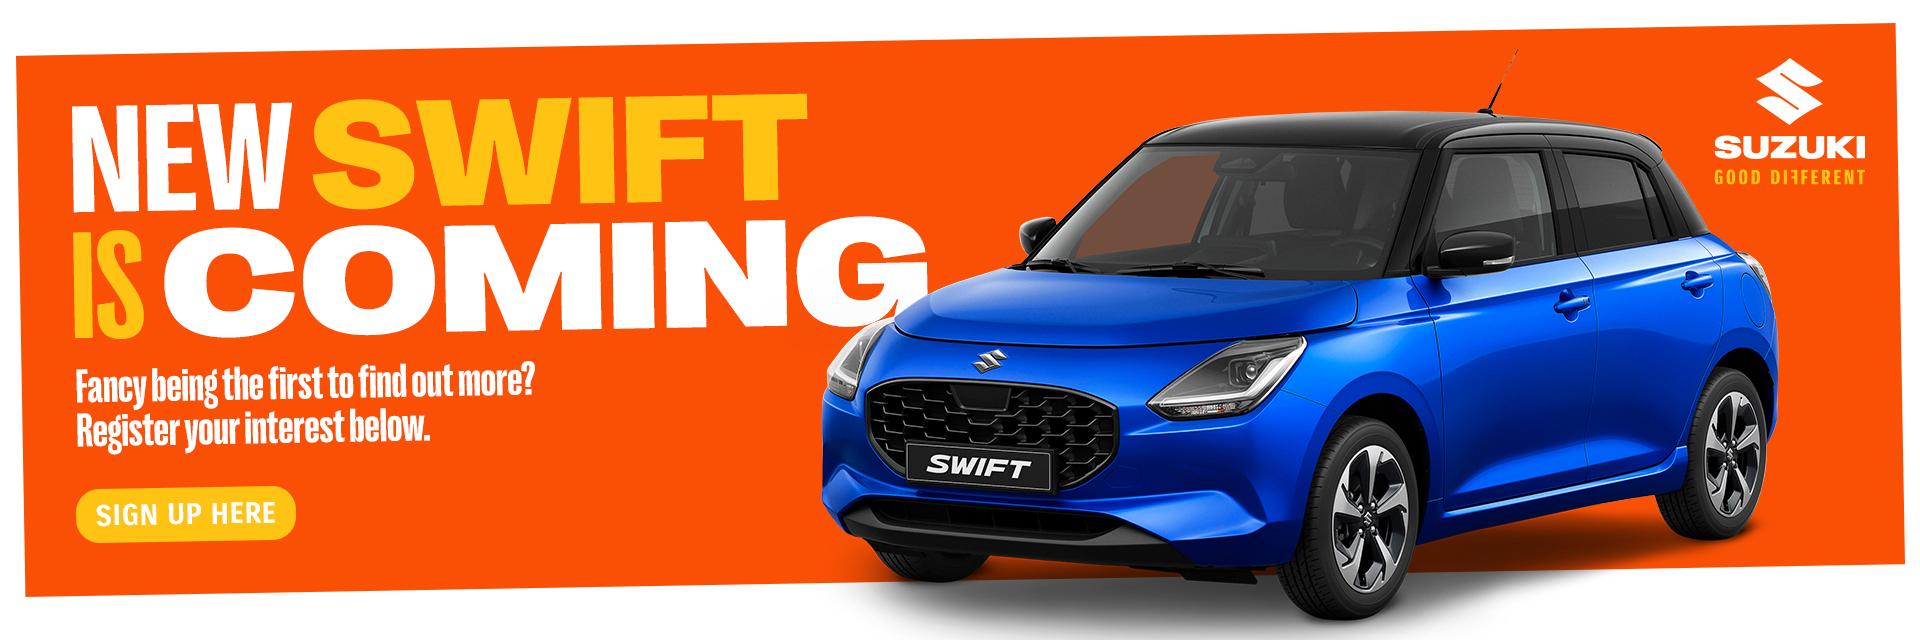 New Swift is coming